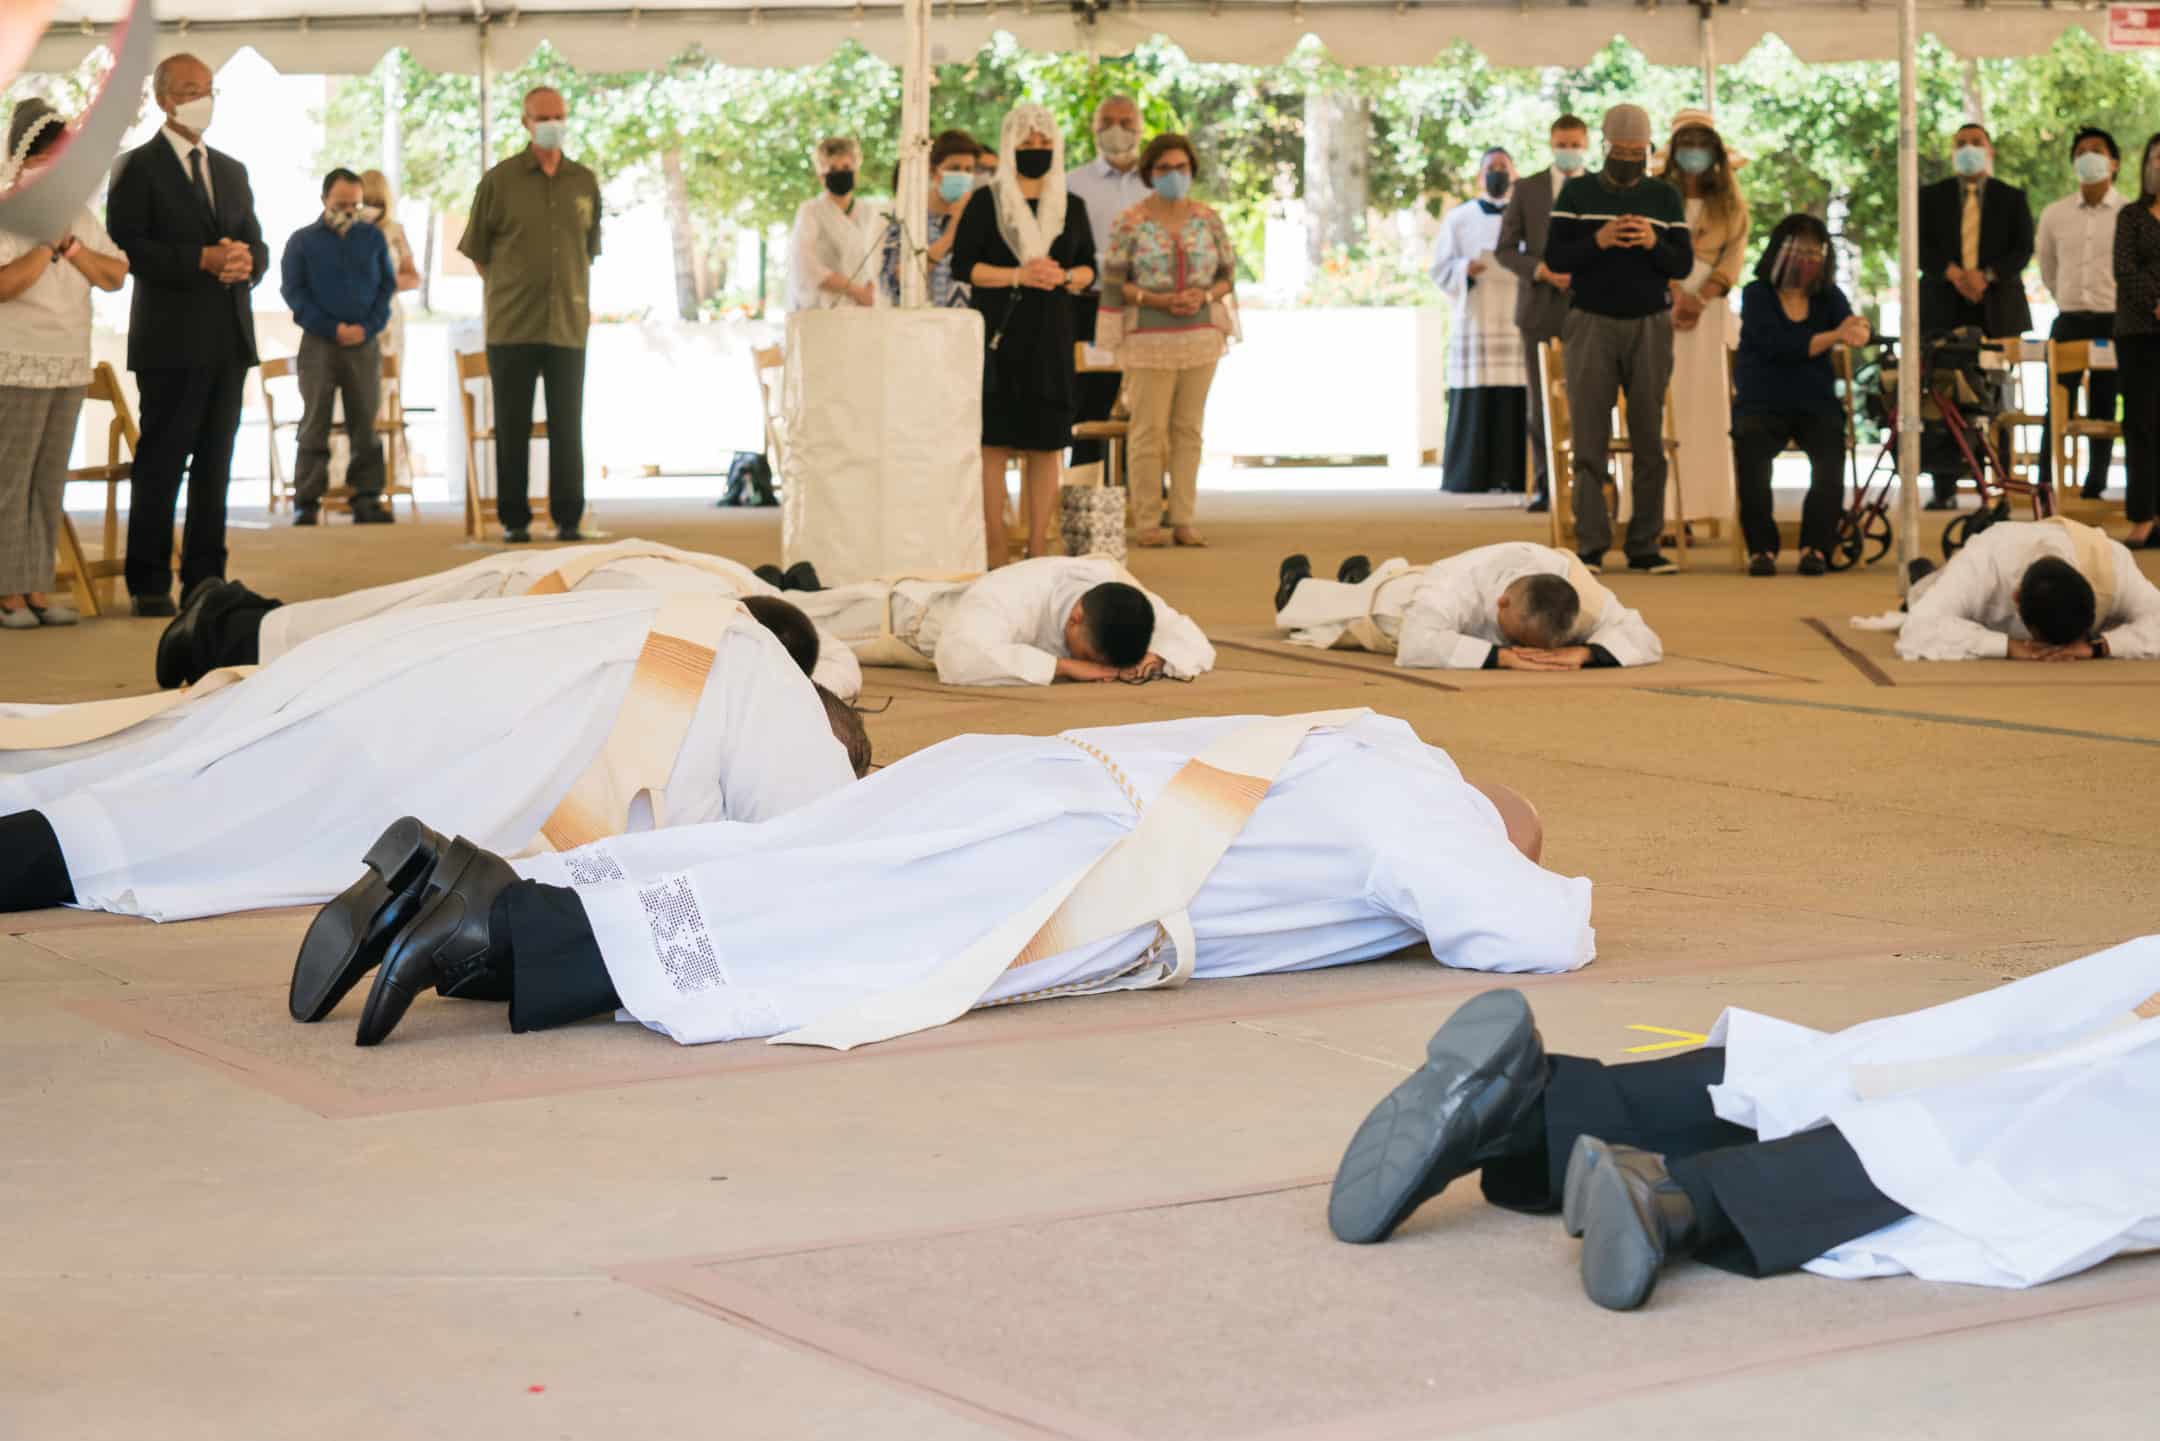 candidates to the priesthood lay prostrate in prayer during the singing of the Litany of the Saints.